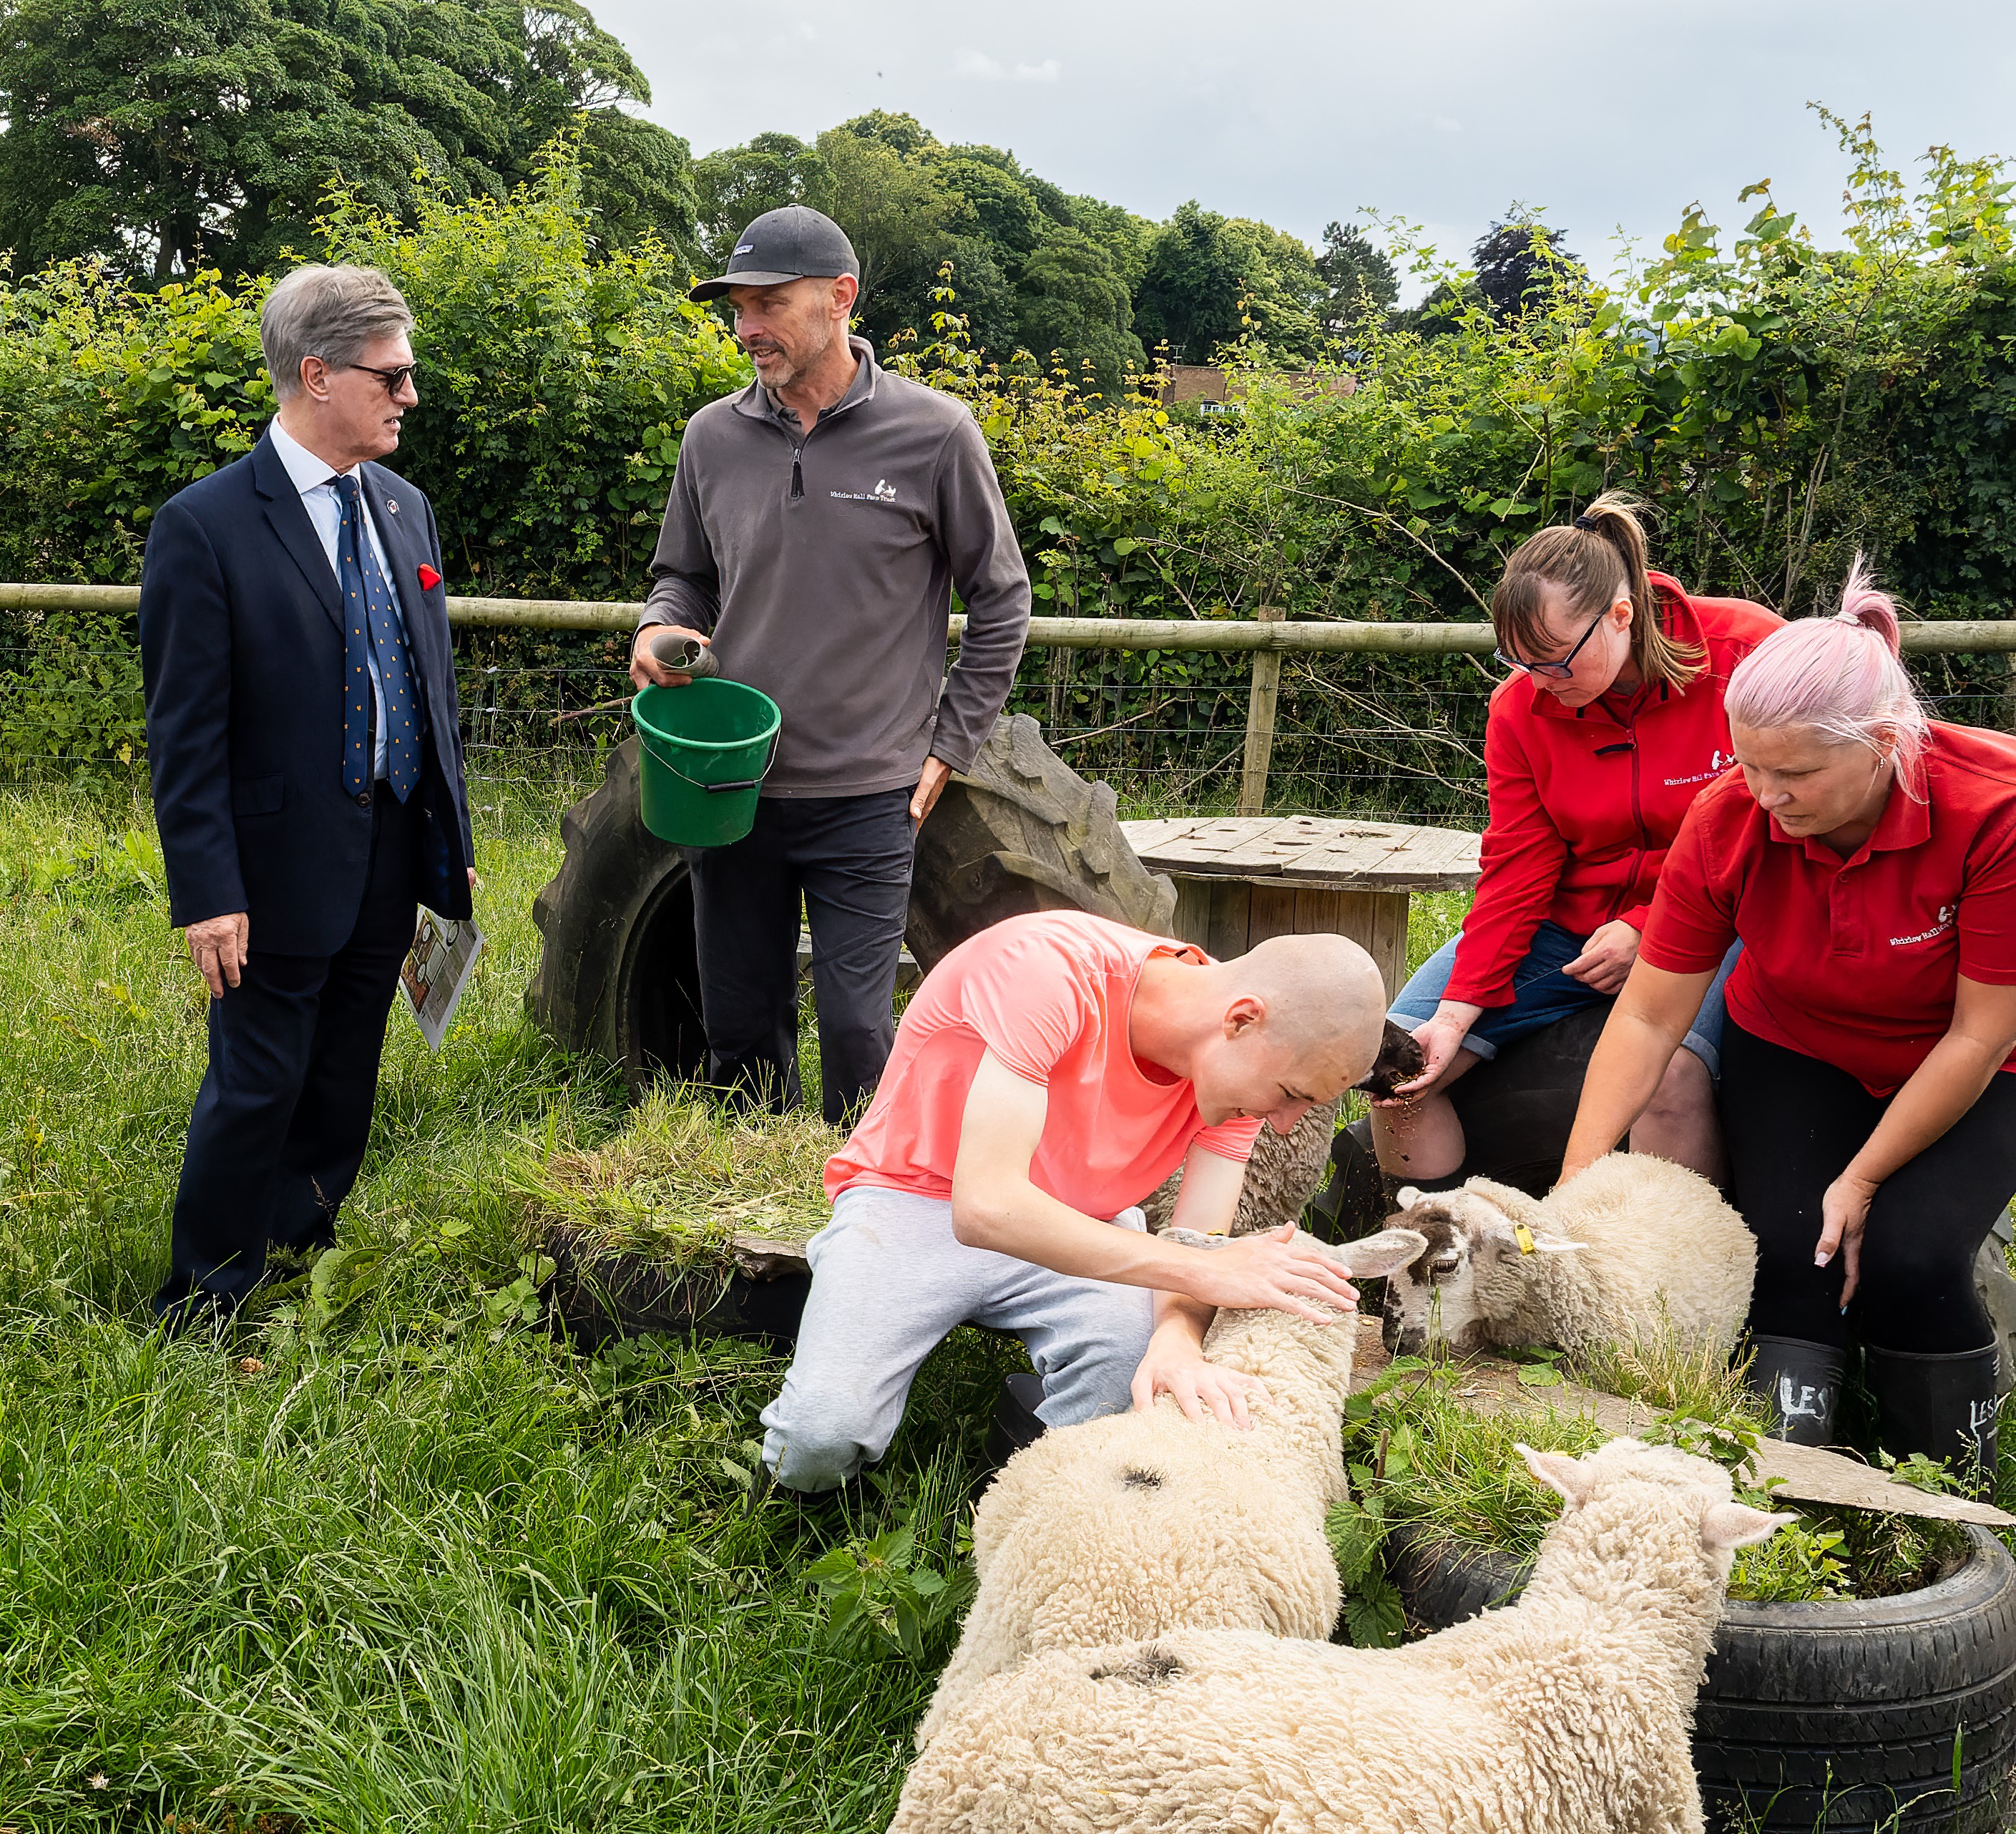 James Newman, the Head Freemason in Yorkshire, West Riding discusses the impact of the Freemasons’ grant with John Gray, Head of the Whirlow Farm Trust’s Education and Development while members of the Farm’s support team and a client demonstrate some of the Farm’s activities